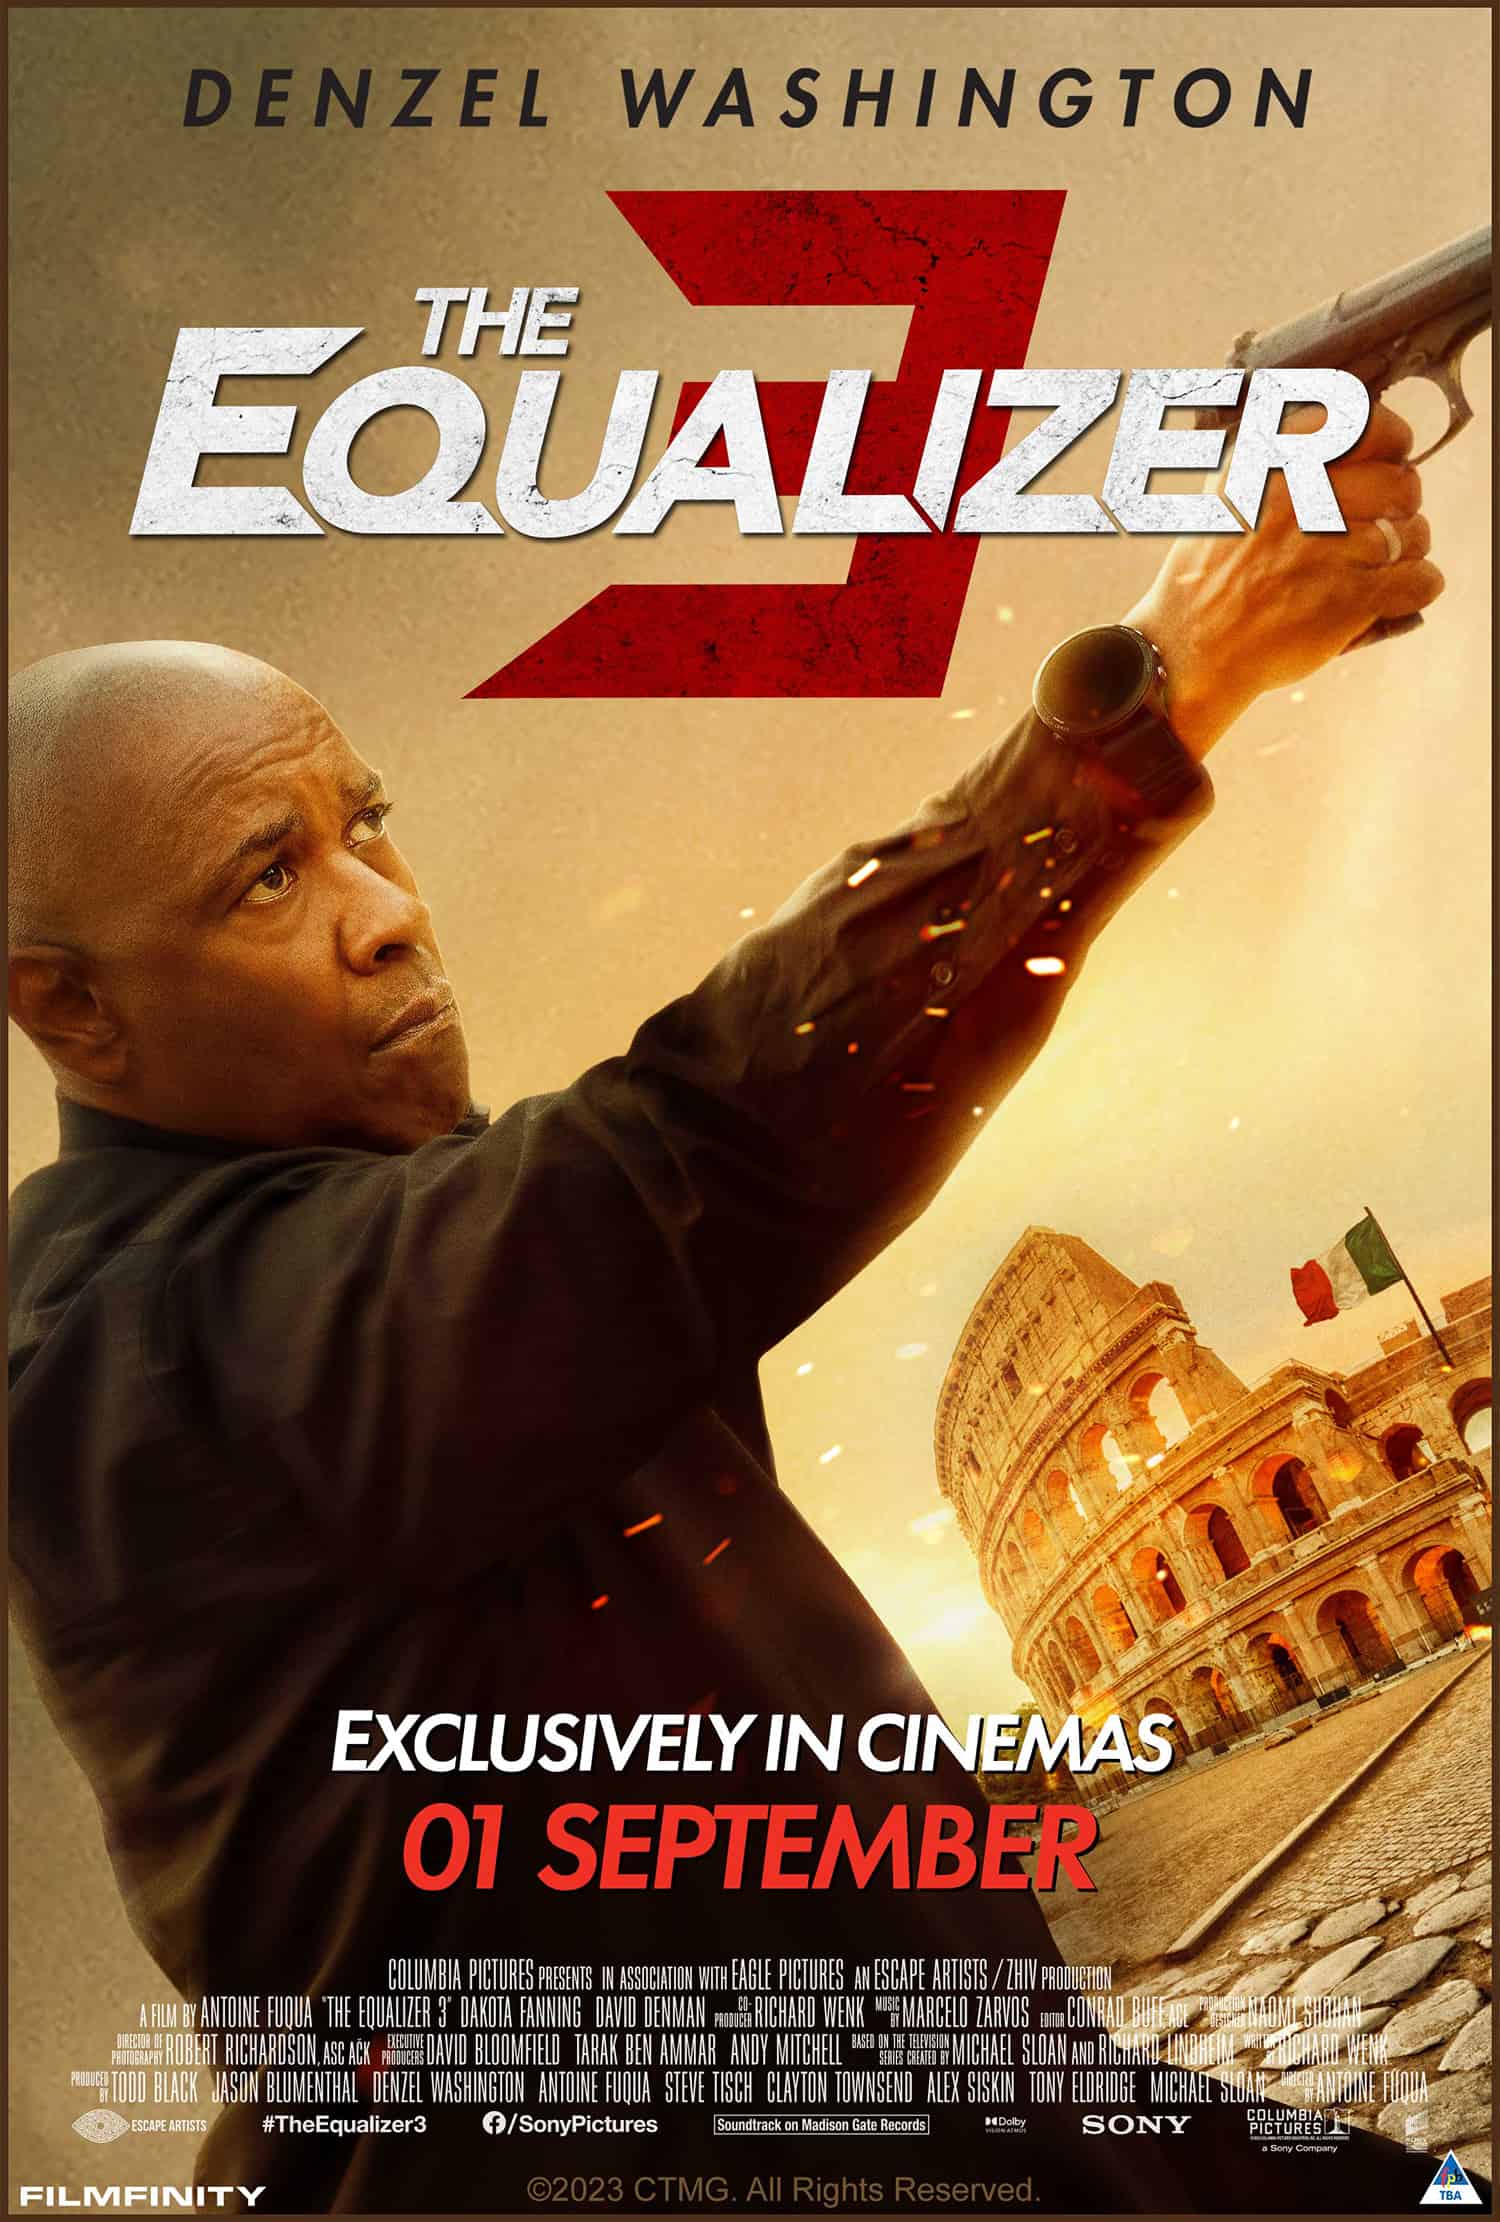 Equalizer 3' review: Denzel Washington reloads as the McCall to call when  in trouble